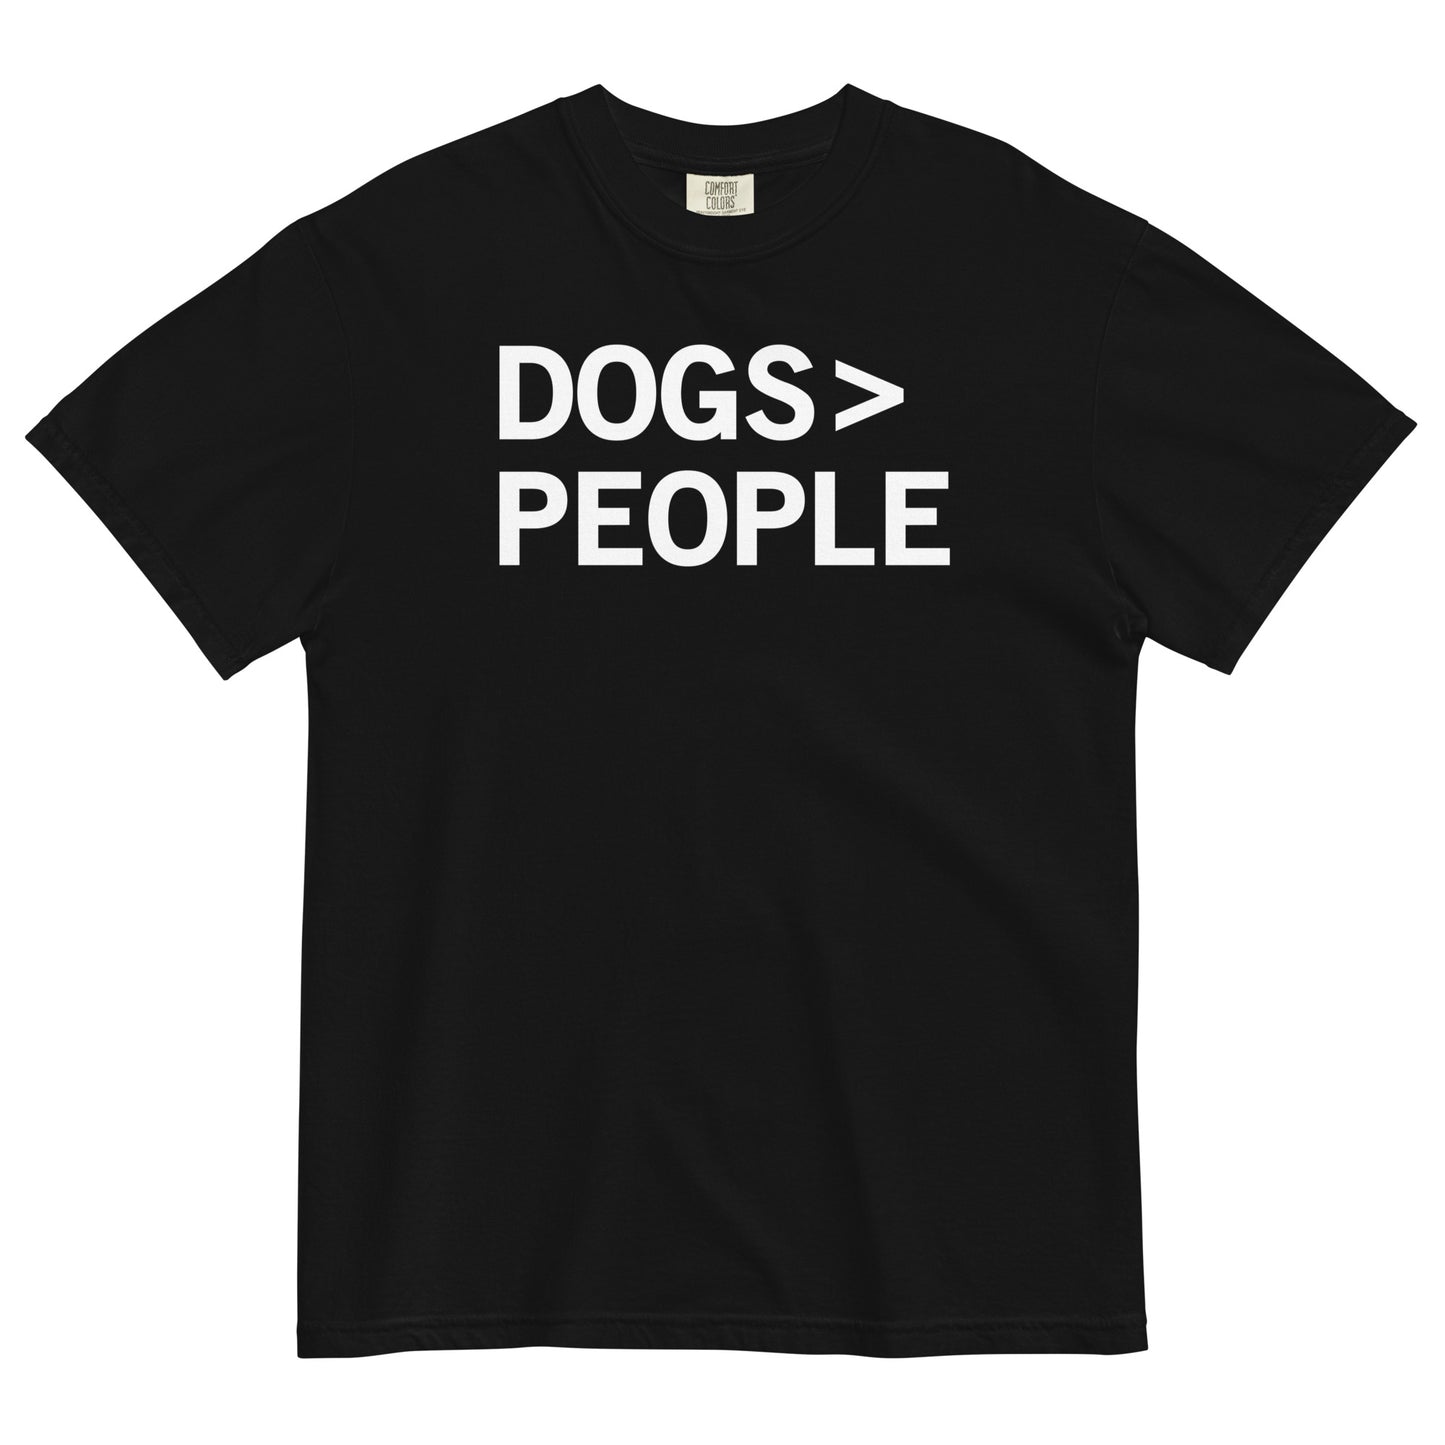 Dogs>People Men's Relaxed Fit Tee